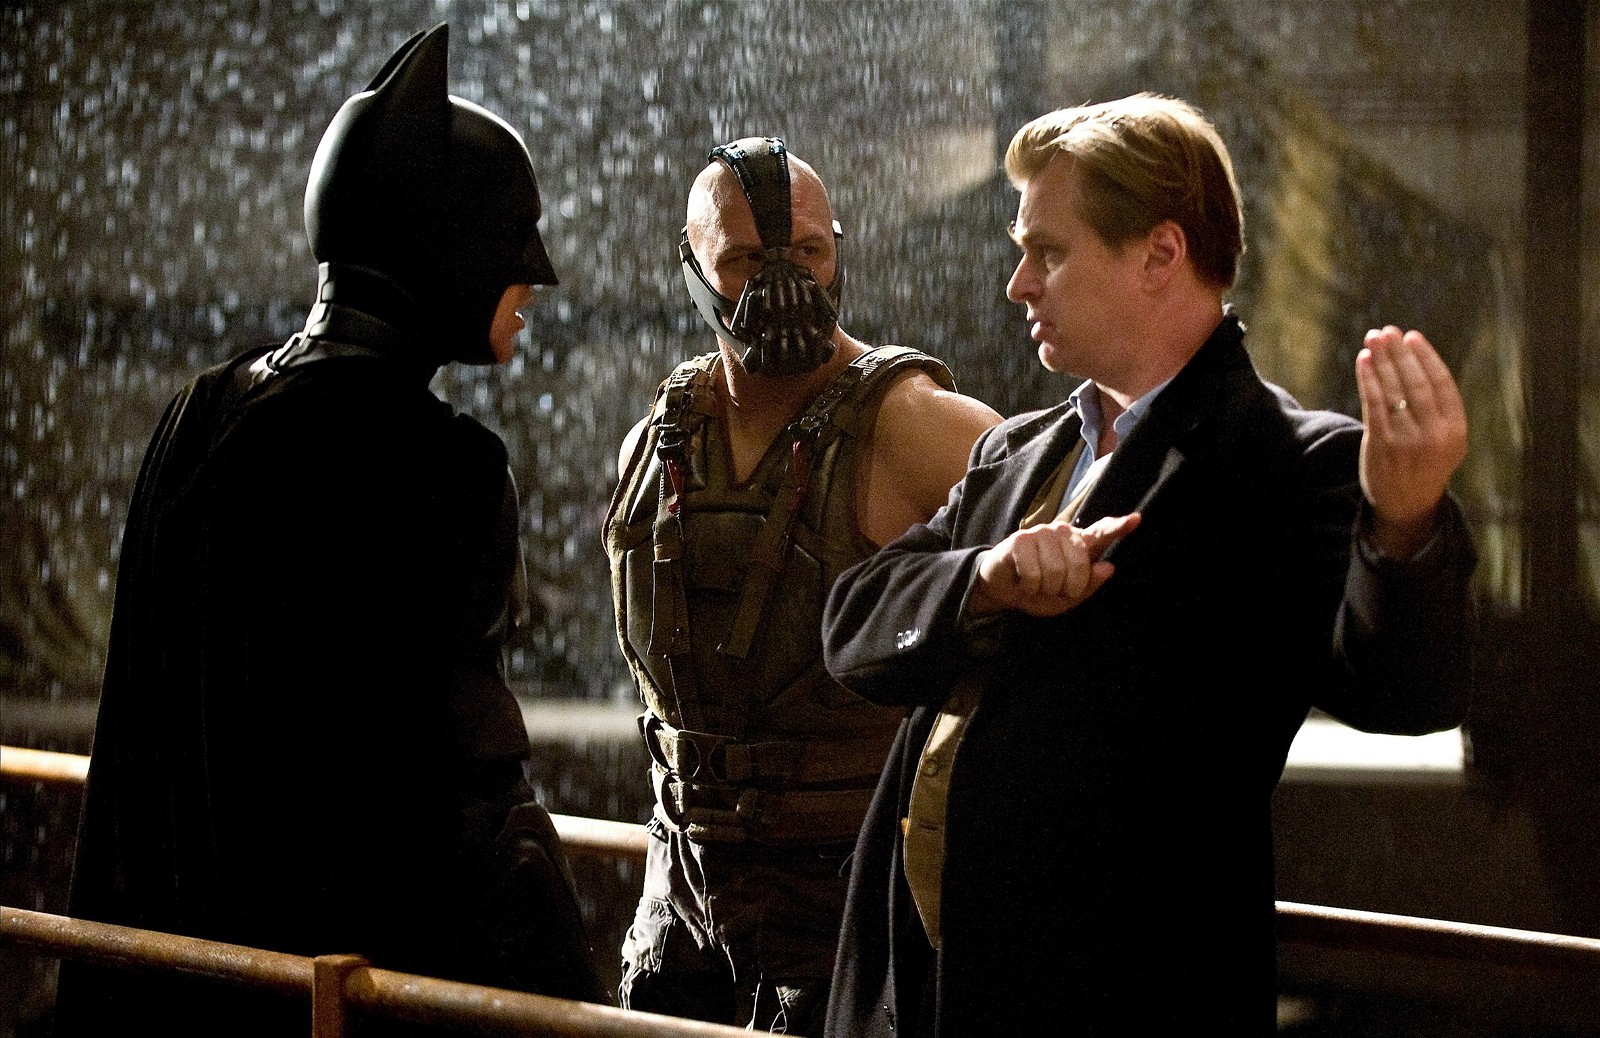 Christian Bale and Christopher Nolan on the sets of The Dark Knight Rises